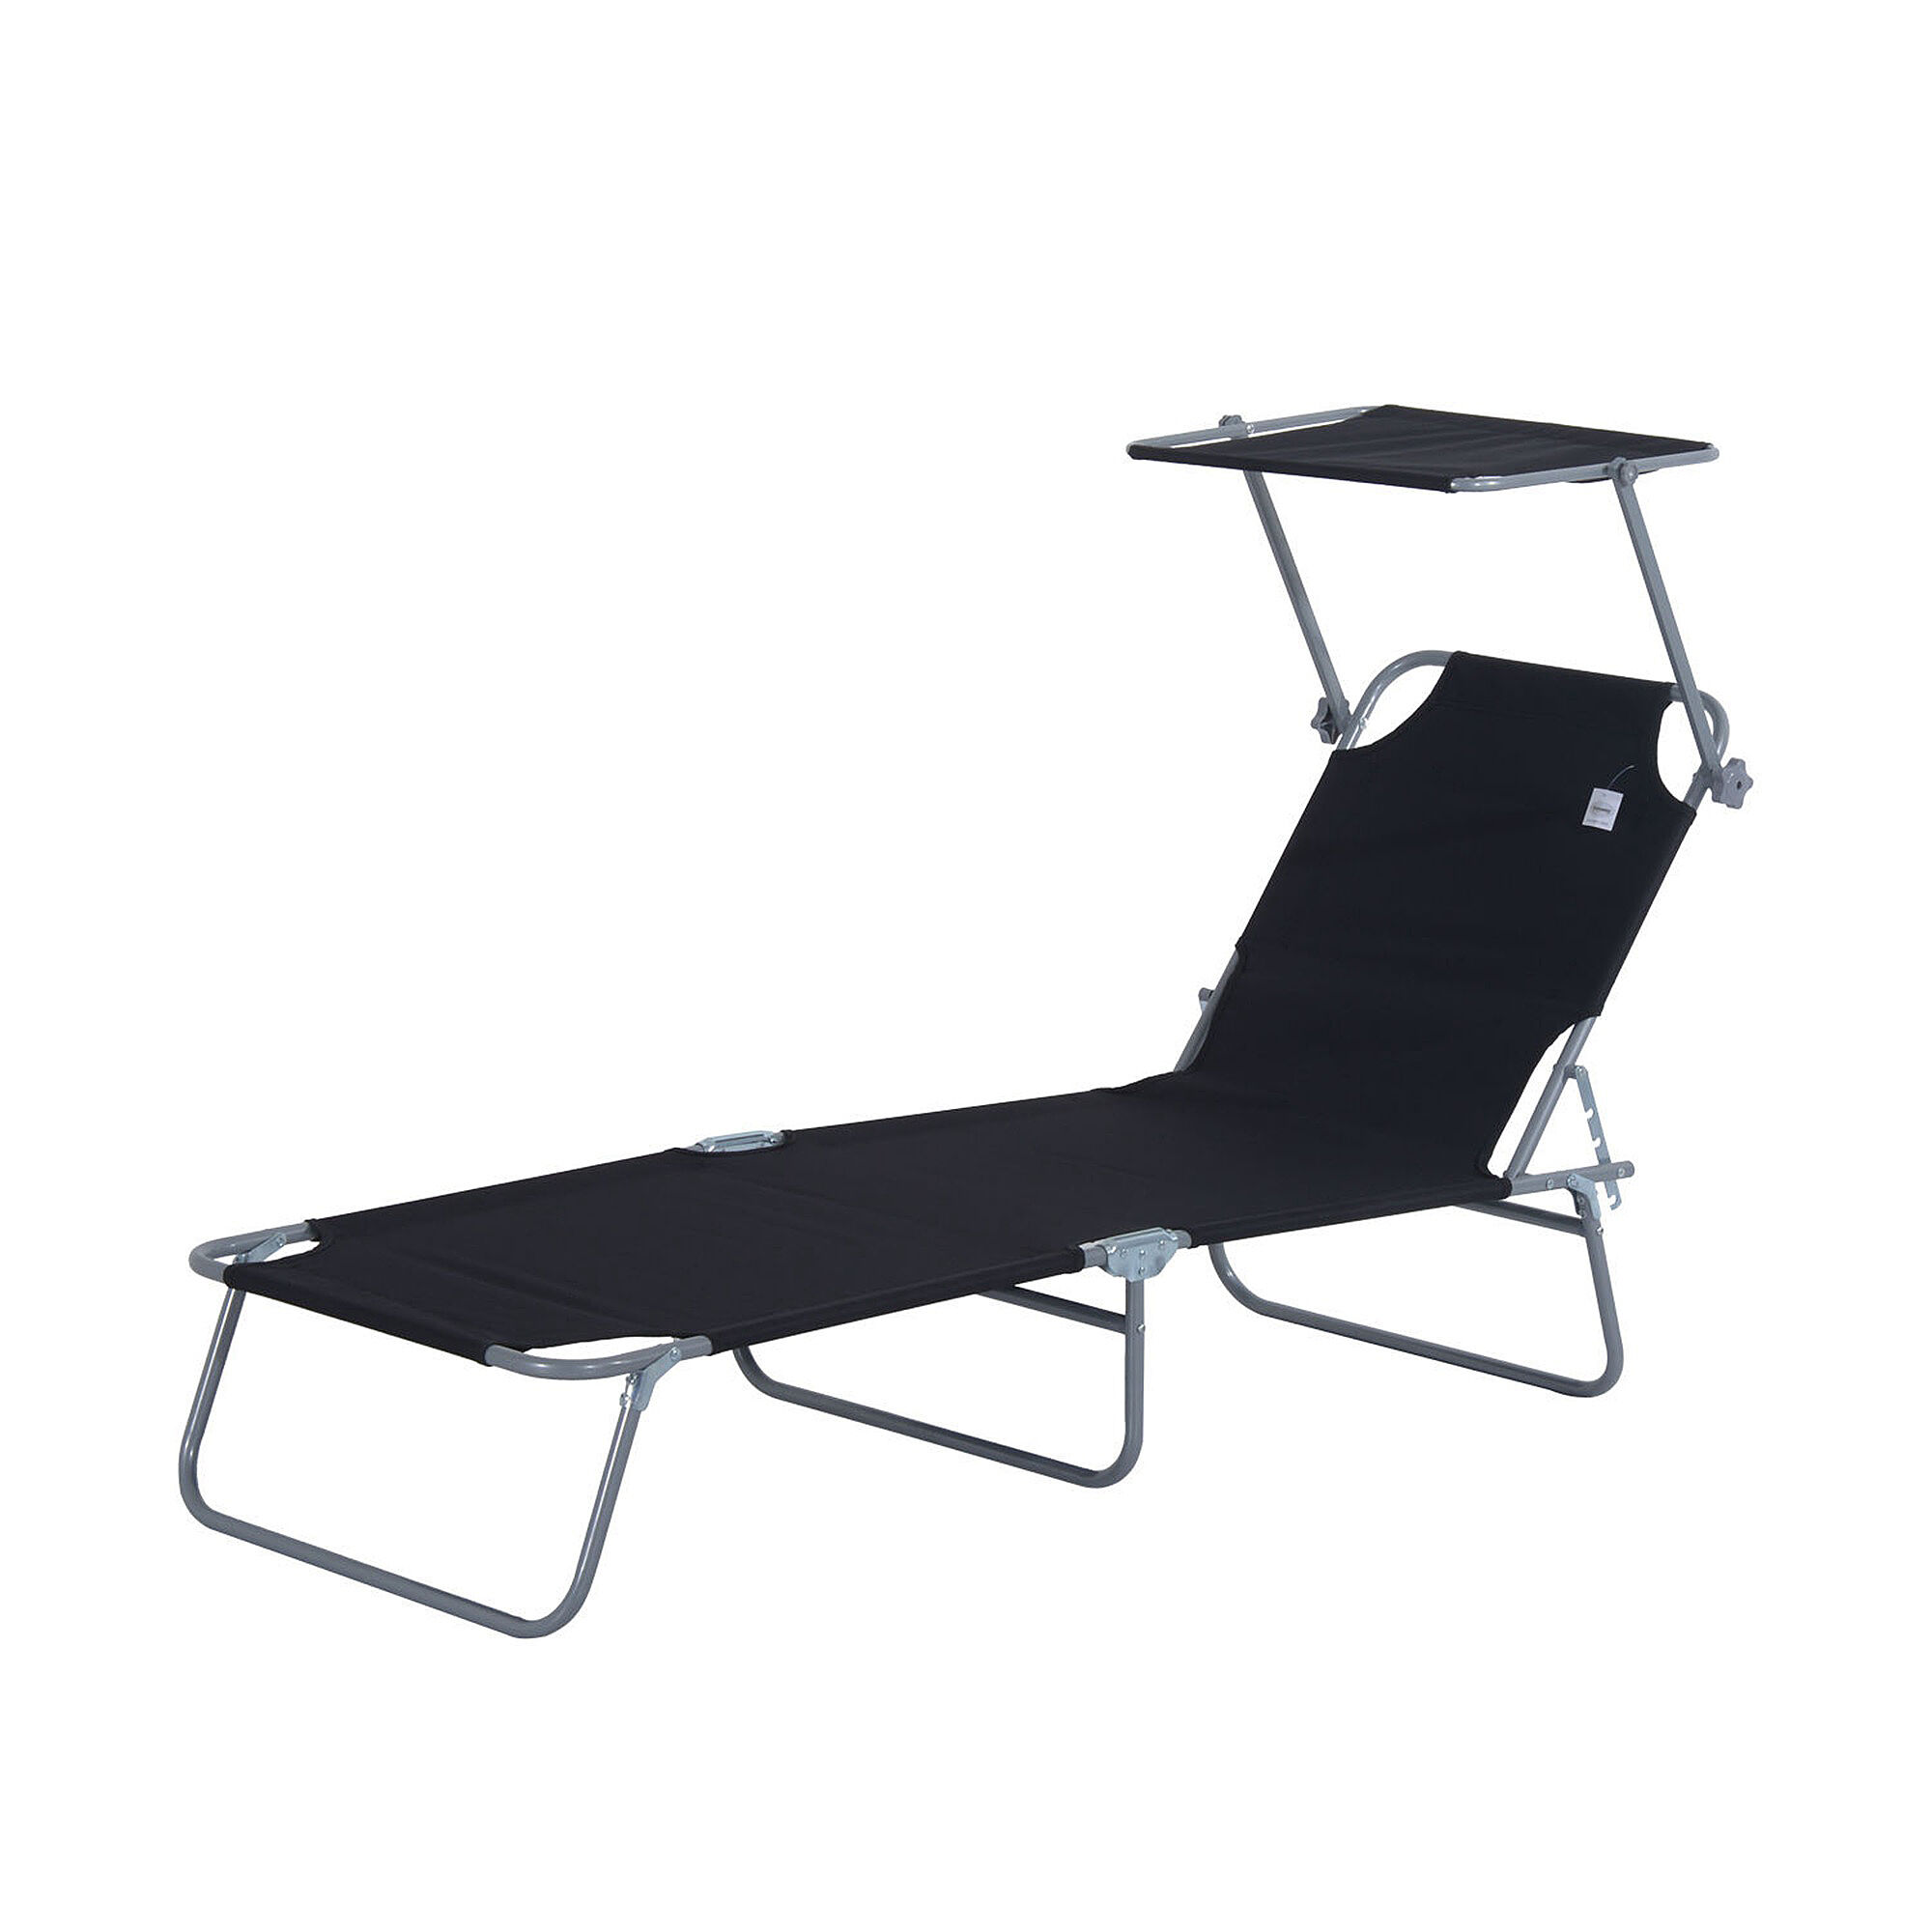 Outsunny Outdoor Pool Chaise Lounge Chair, Folding Tanning Chair with Sun Shade